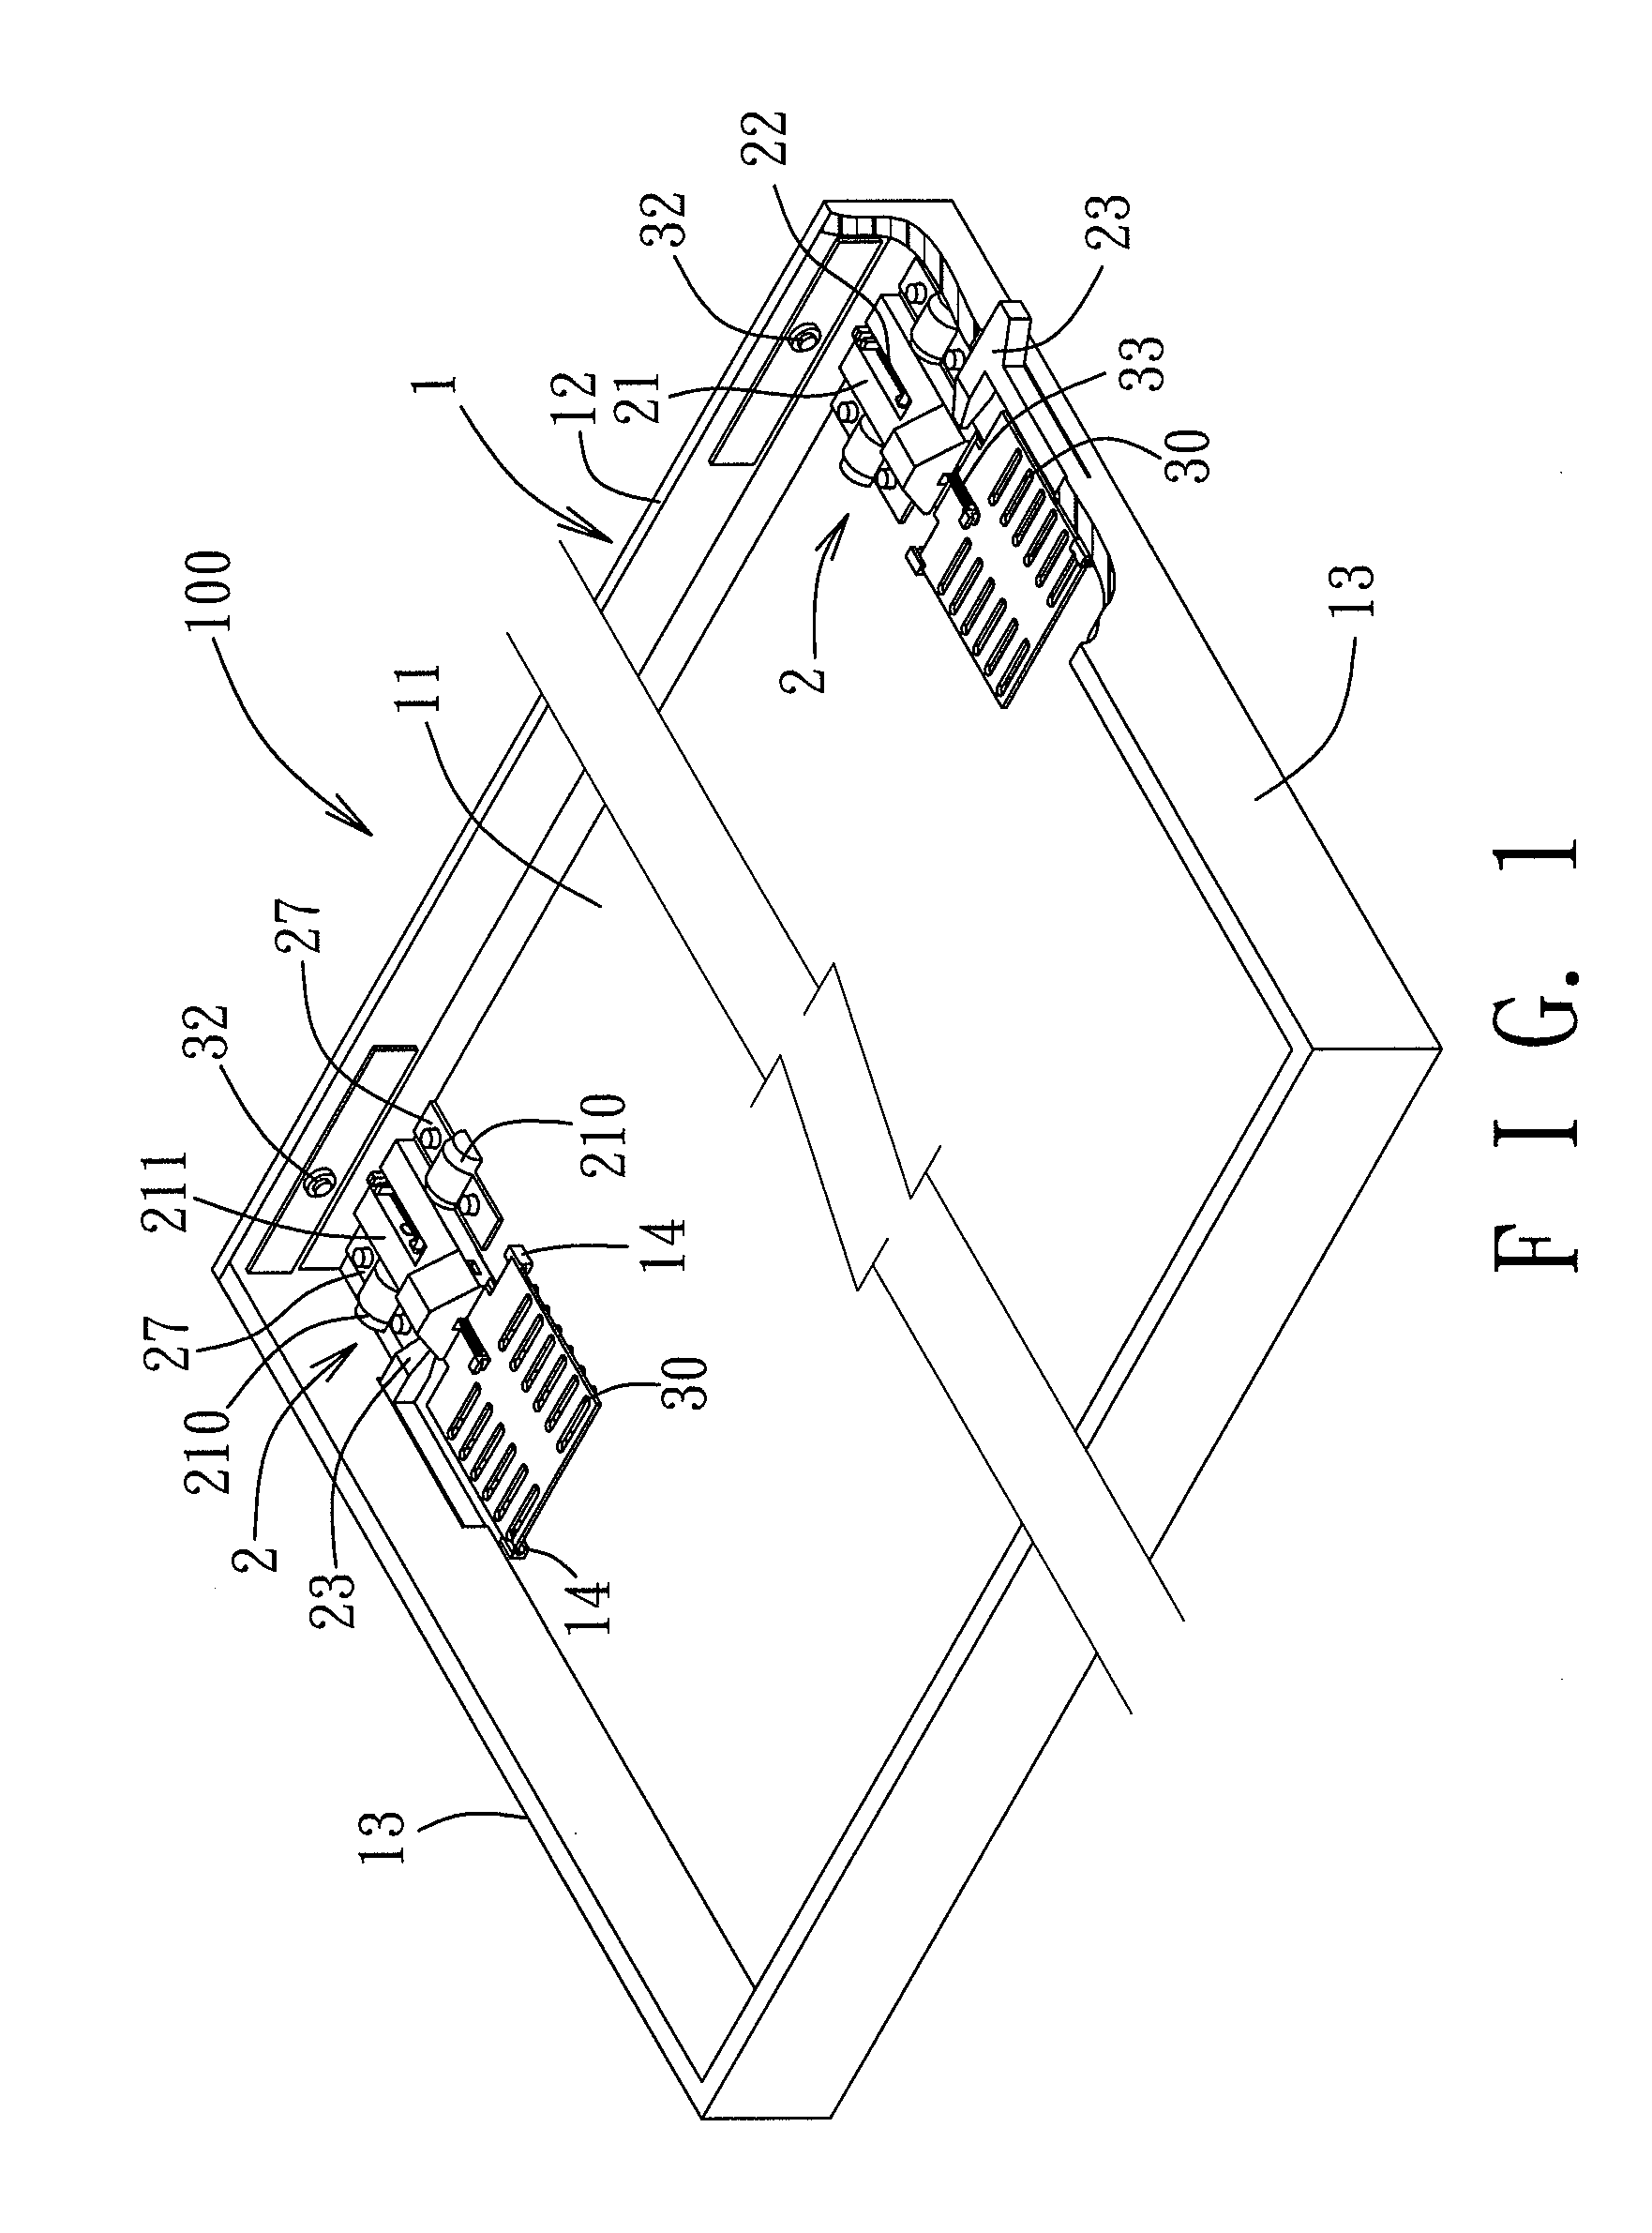 Electronic device housing having a movable foot pad mechanism